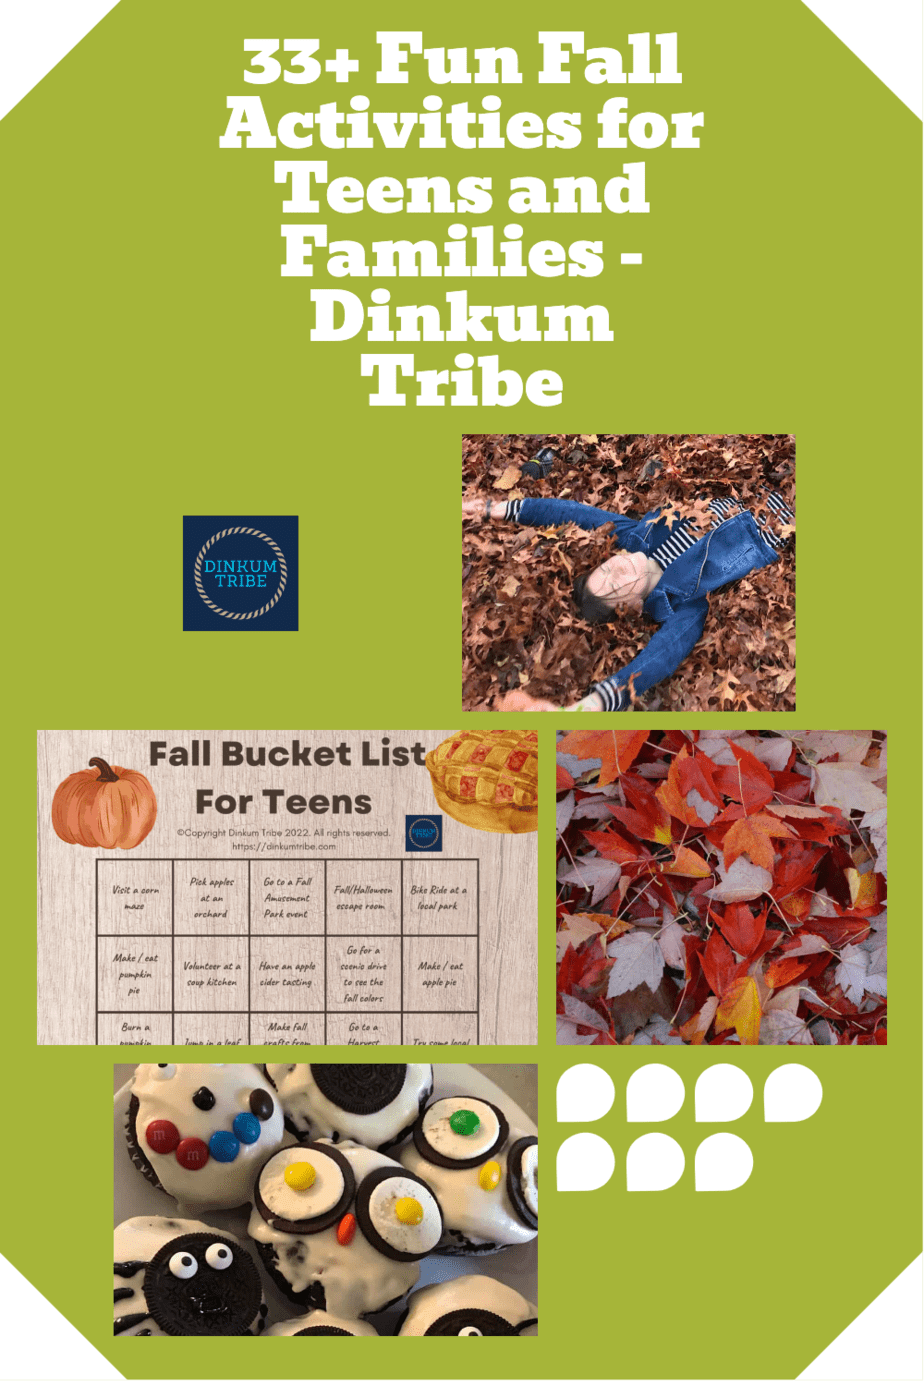 collage of images for fall activities for teens